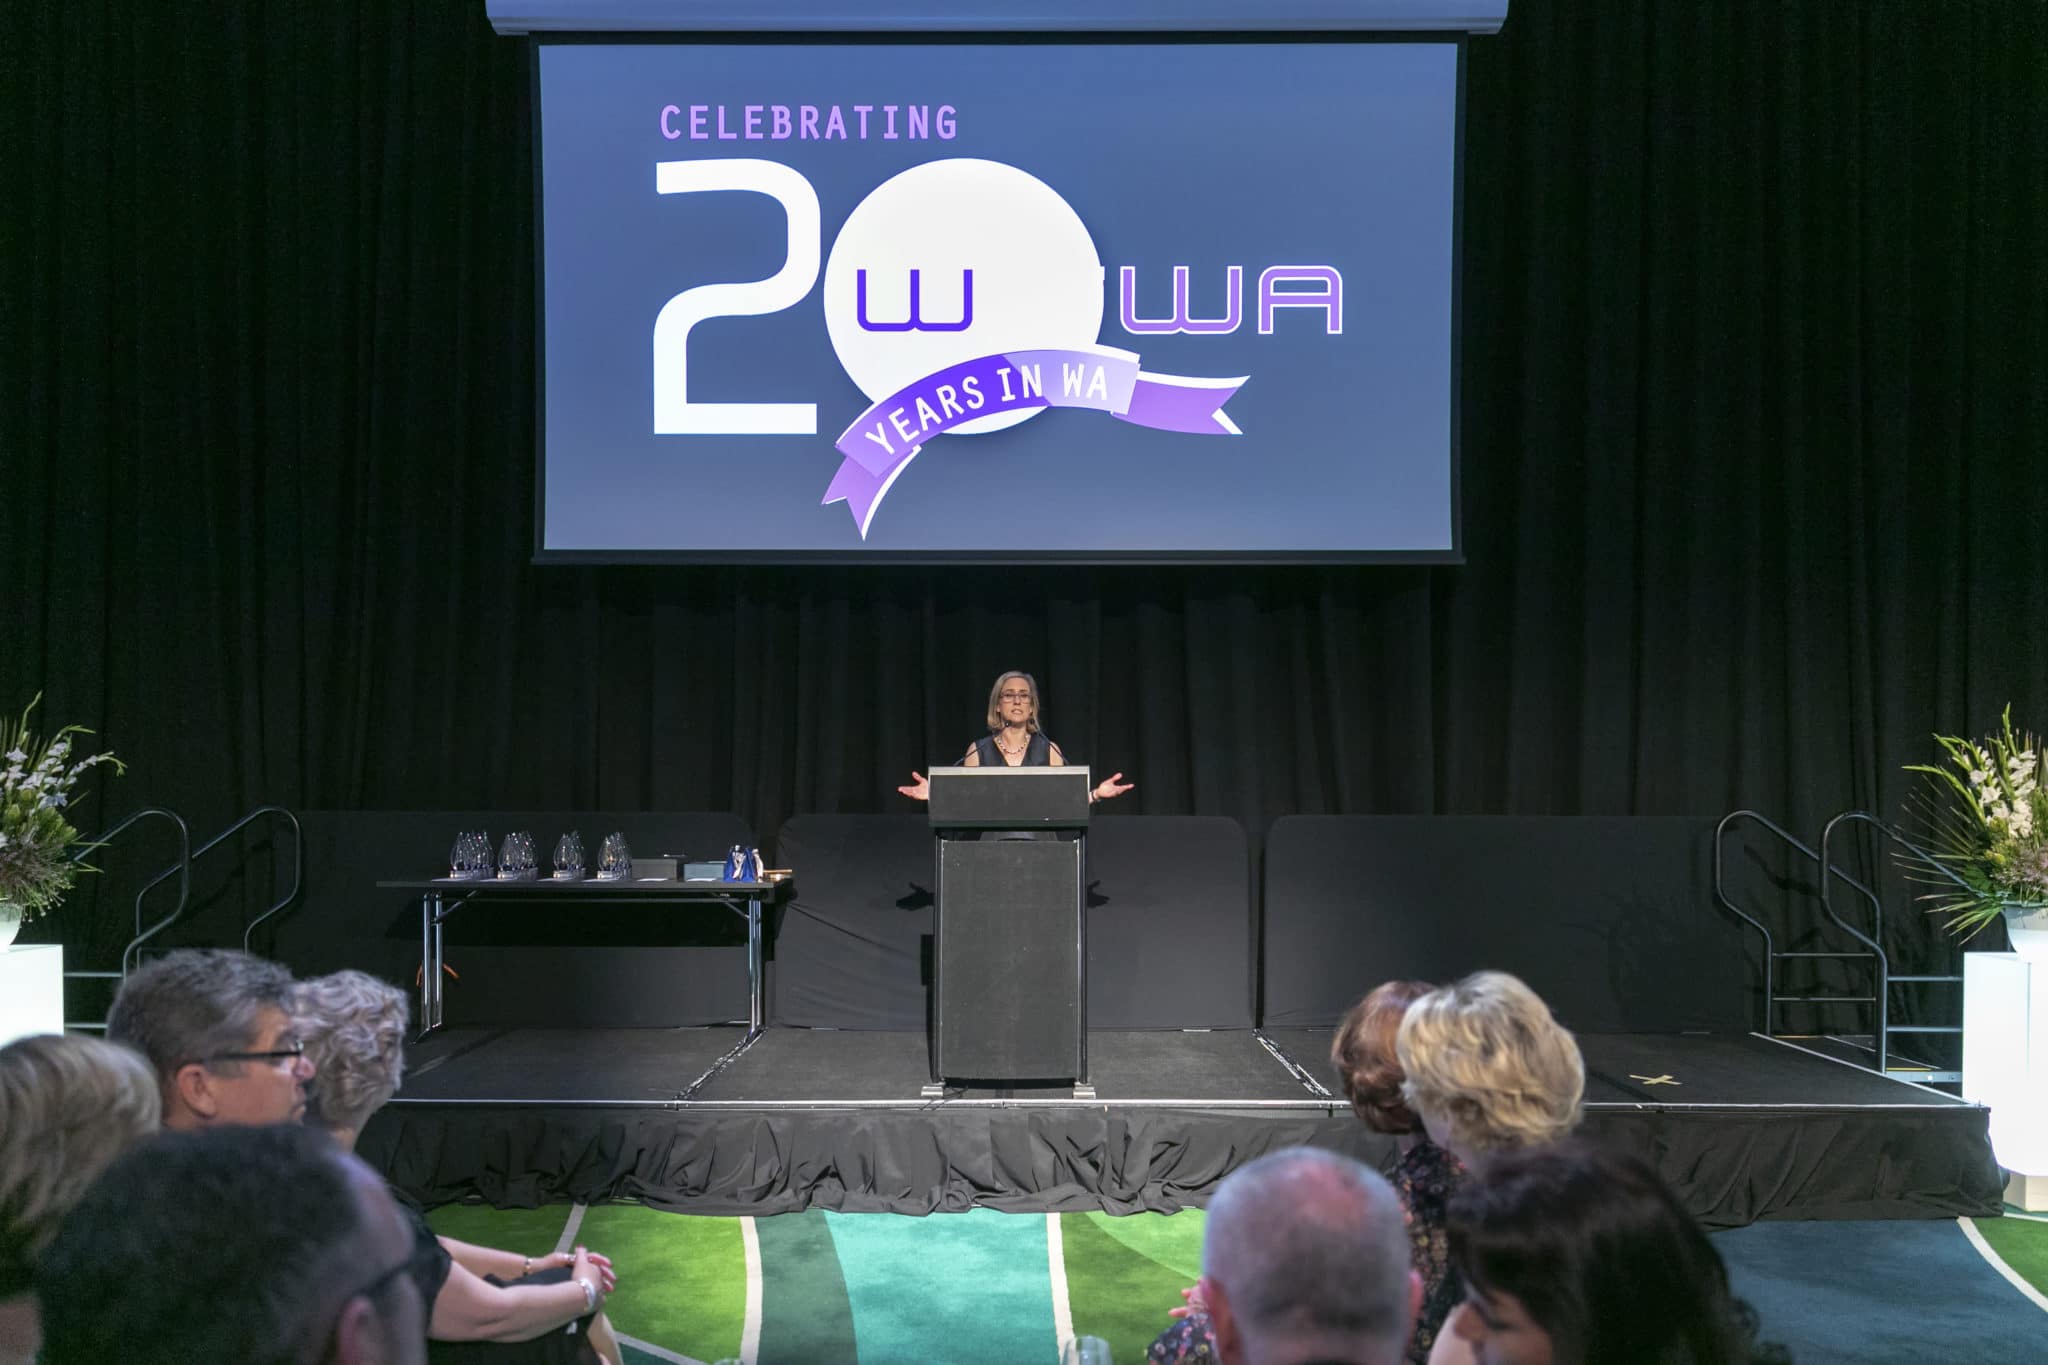 WiTWA 2018 20 in 20 Awards powerpoint slide with presenter standing behind a lecturn